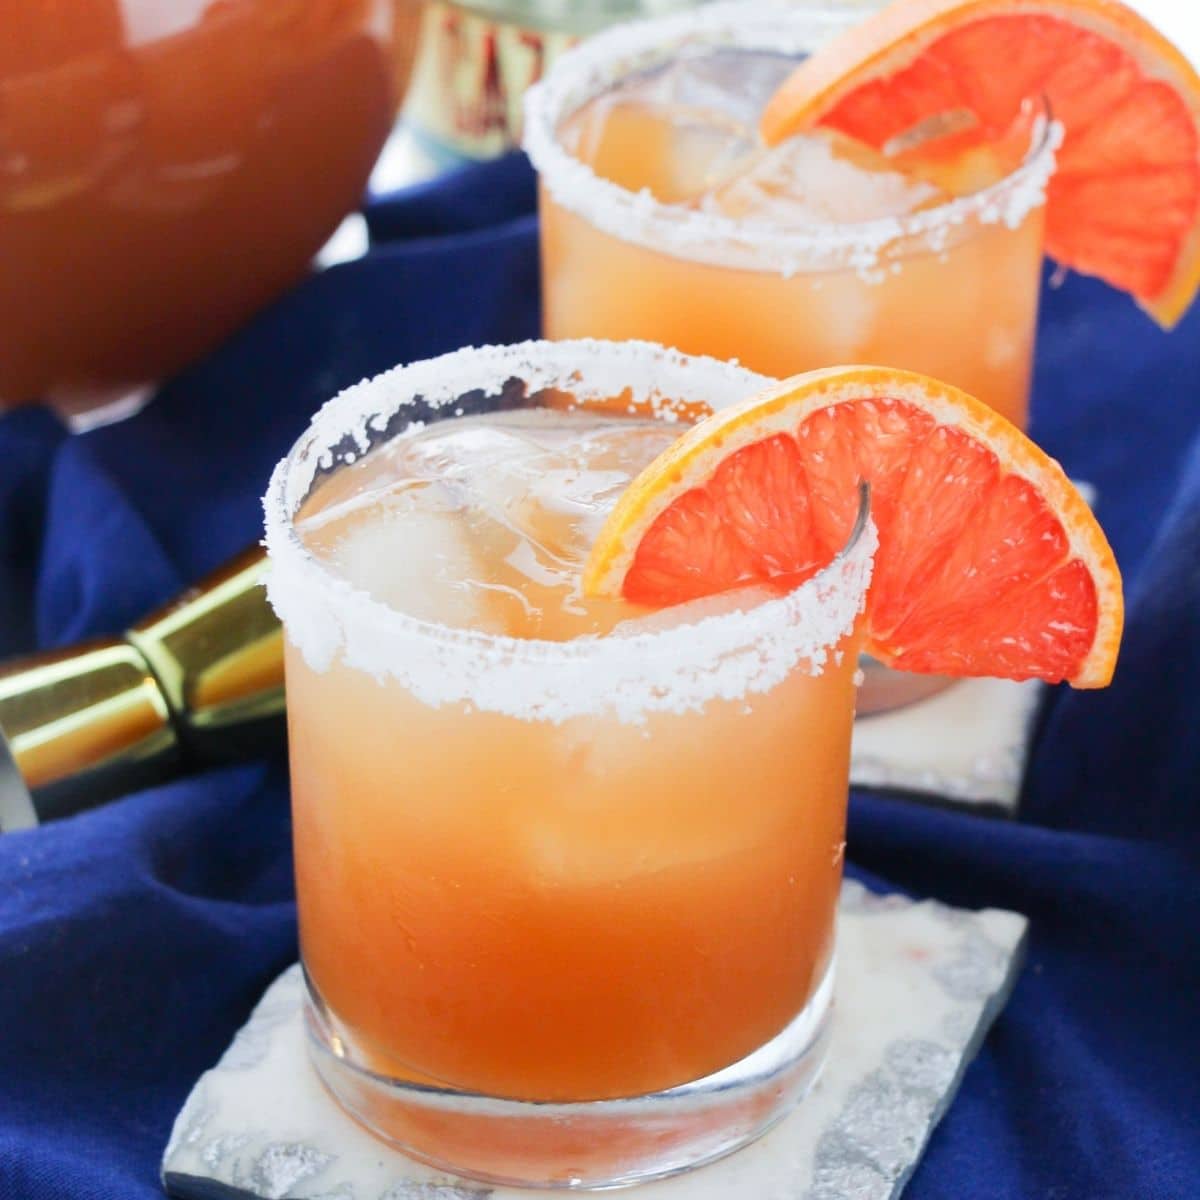 A clear glass filled with grapefruit margarita with salt rimming the glass.